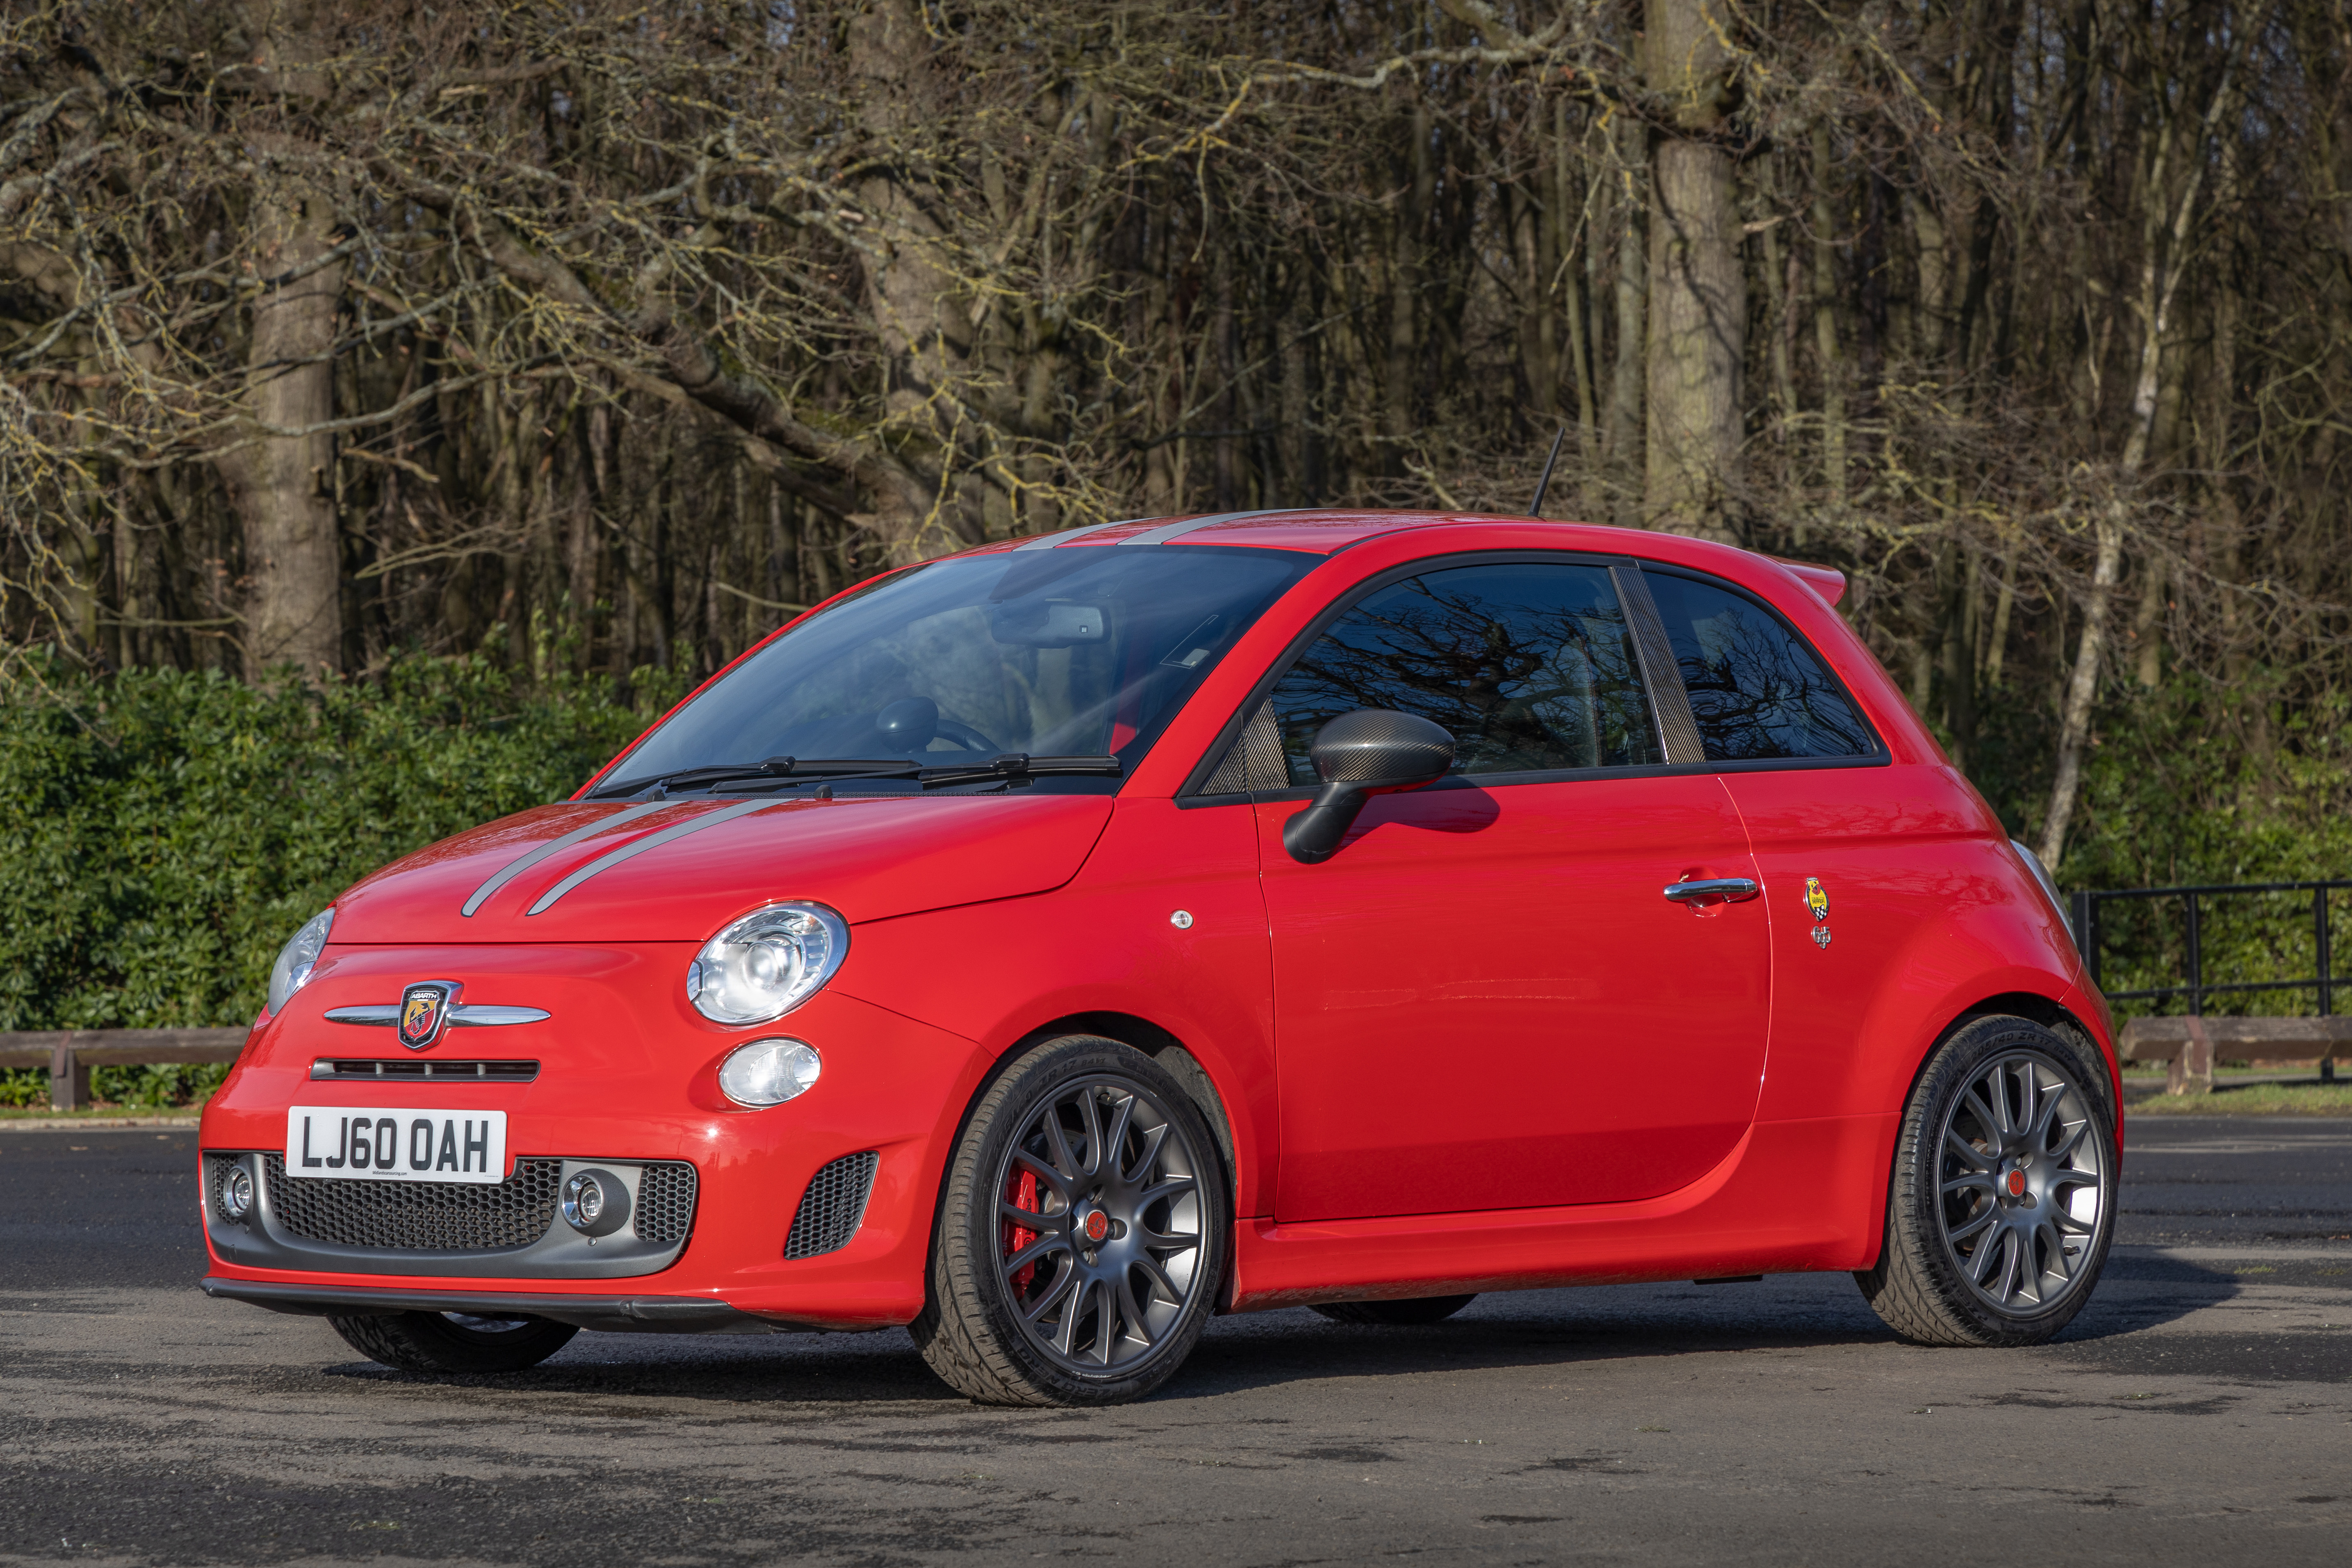 2010 ABARTH 695 TRIBUTO FERRARI for sale by auction in Newcastle 